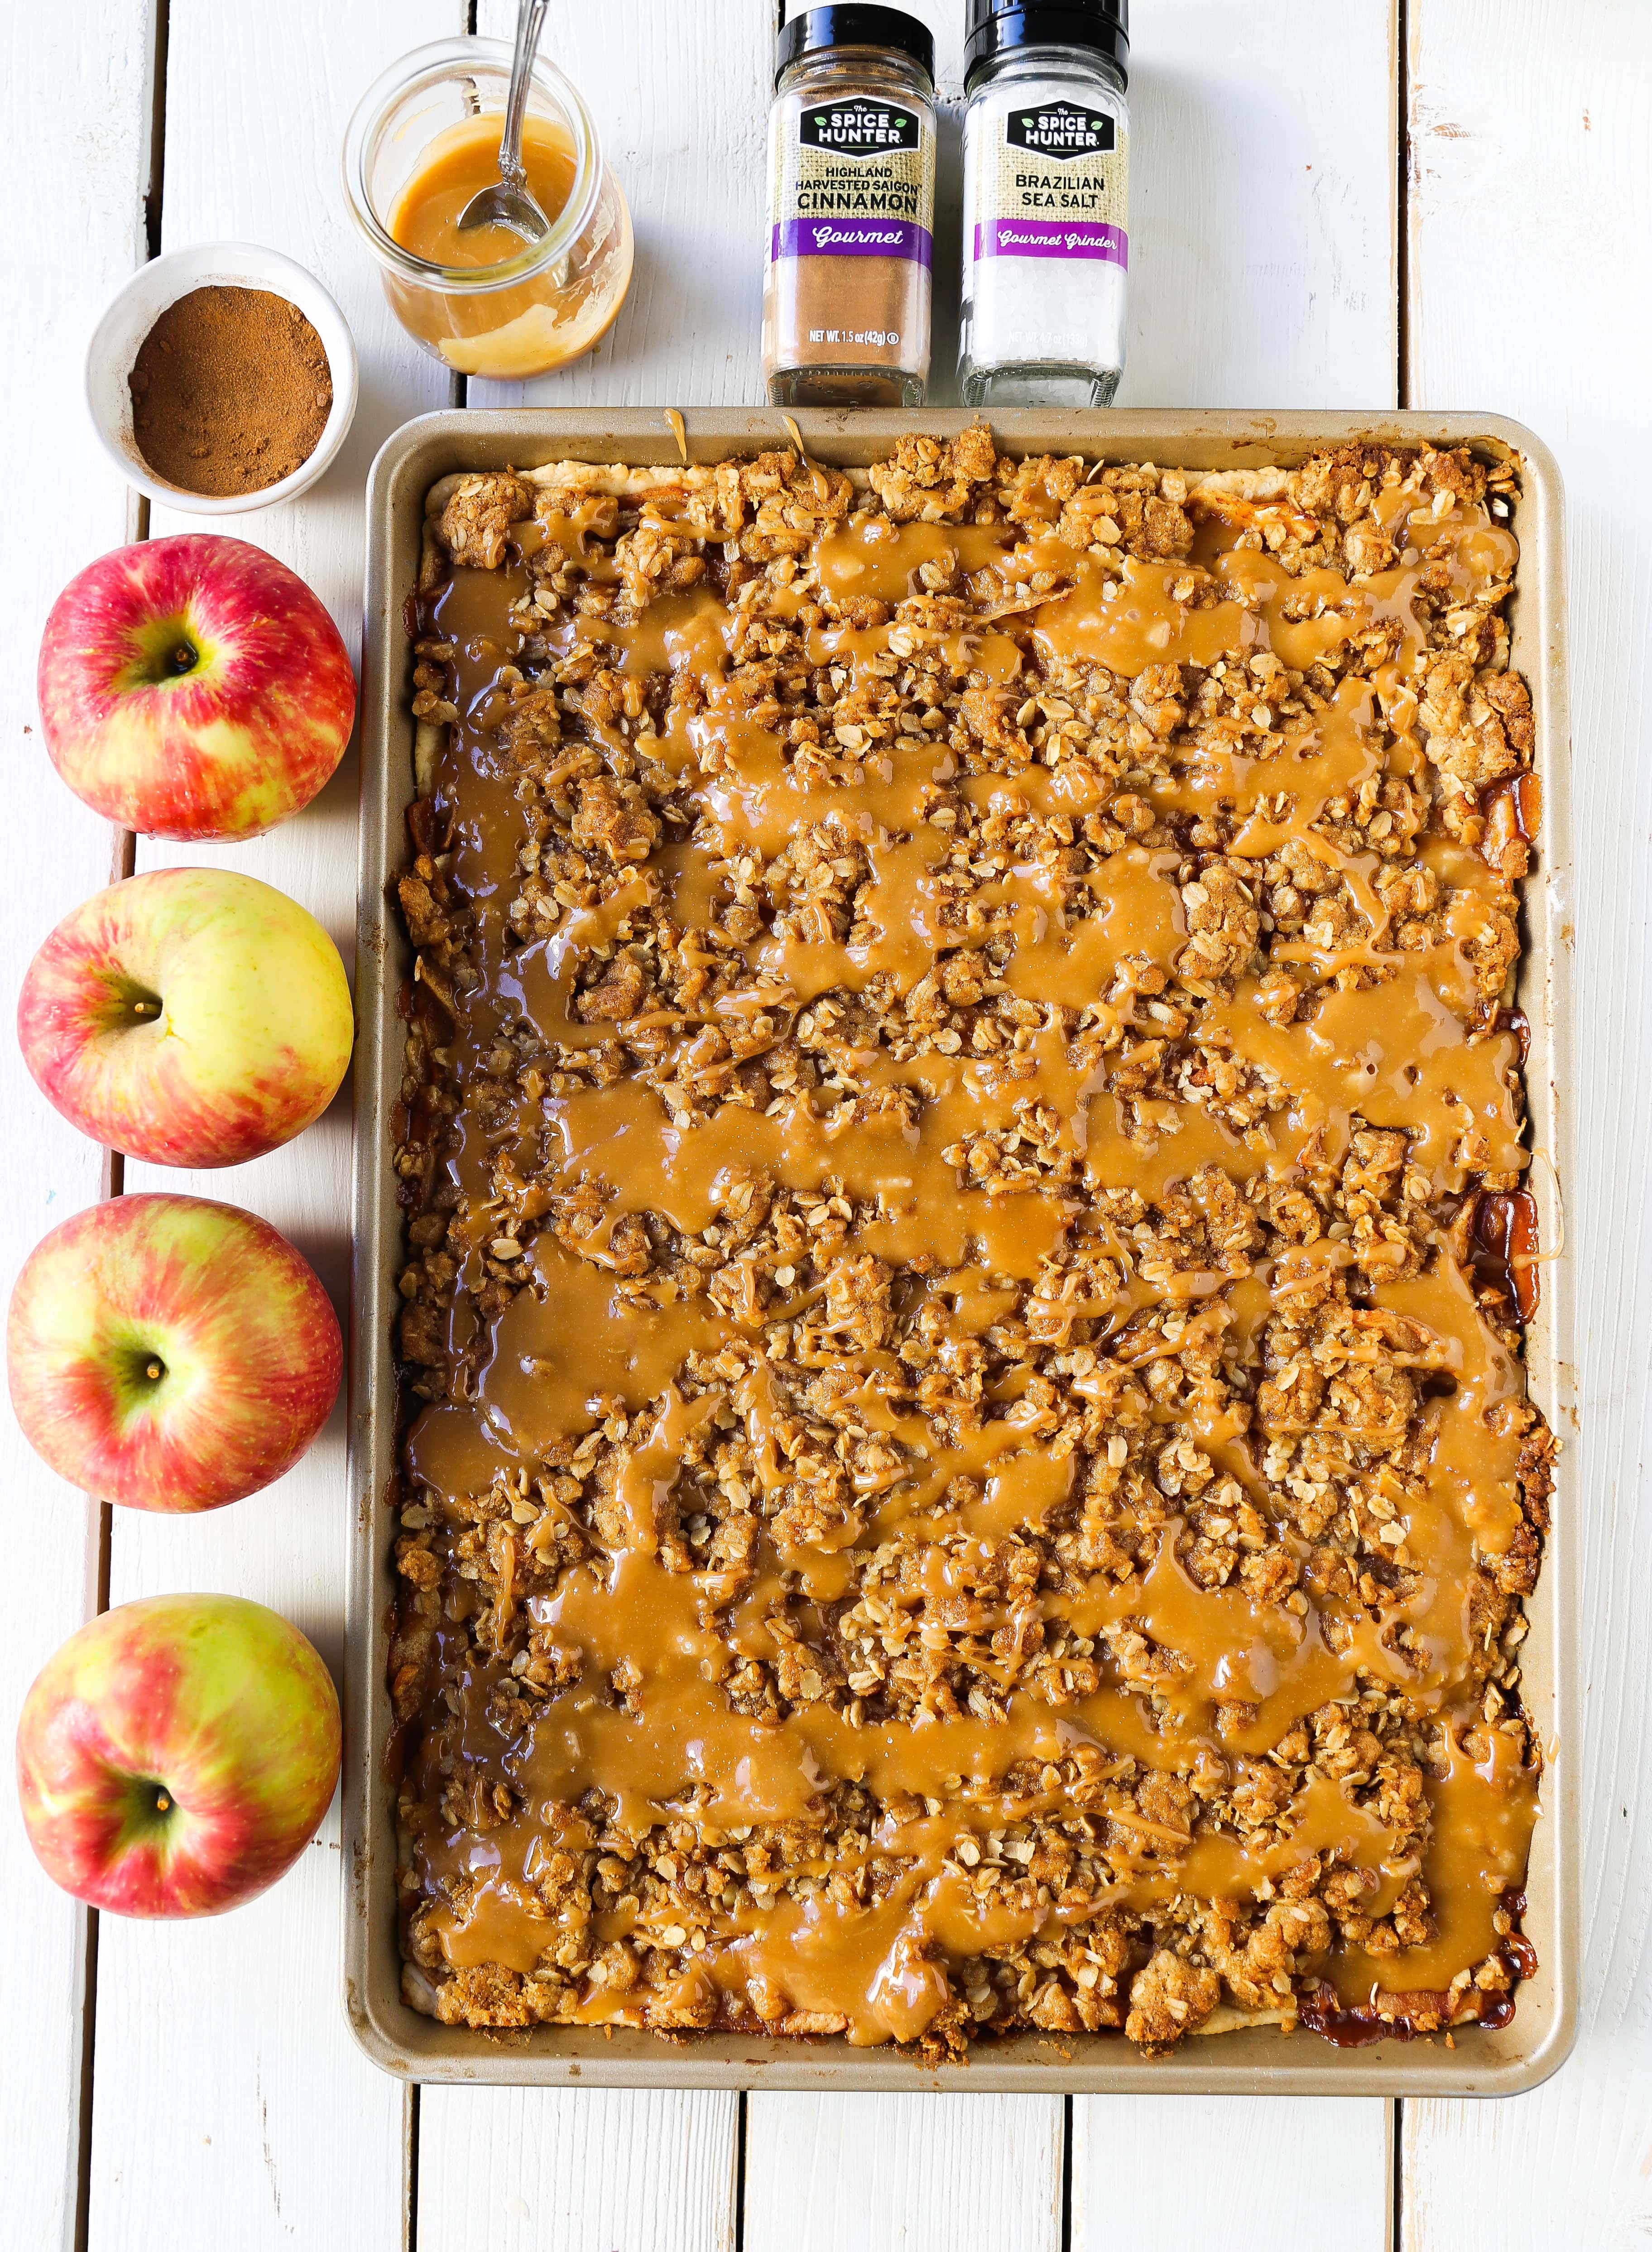 Caramel Apple Slab Pie Juicy cinnamon sugar apples baked in a flaky pie crust and topped with a buttery brown sugar crumb topping then drizzled with homemade salted caramel. An easy way to make apple pie to feed a crowd! www.modernhoney.com #applepie #apples #caramelapplepie #appleslabpie #slabpie